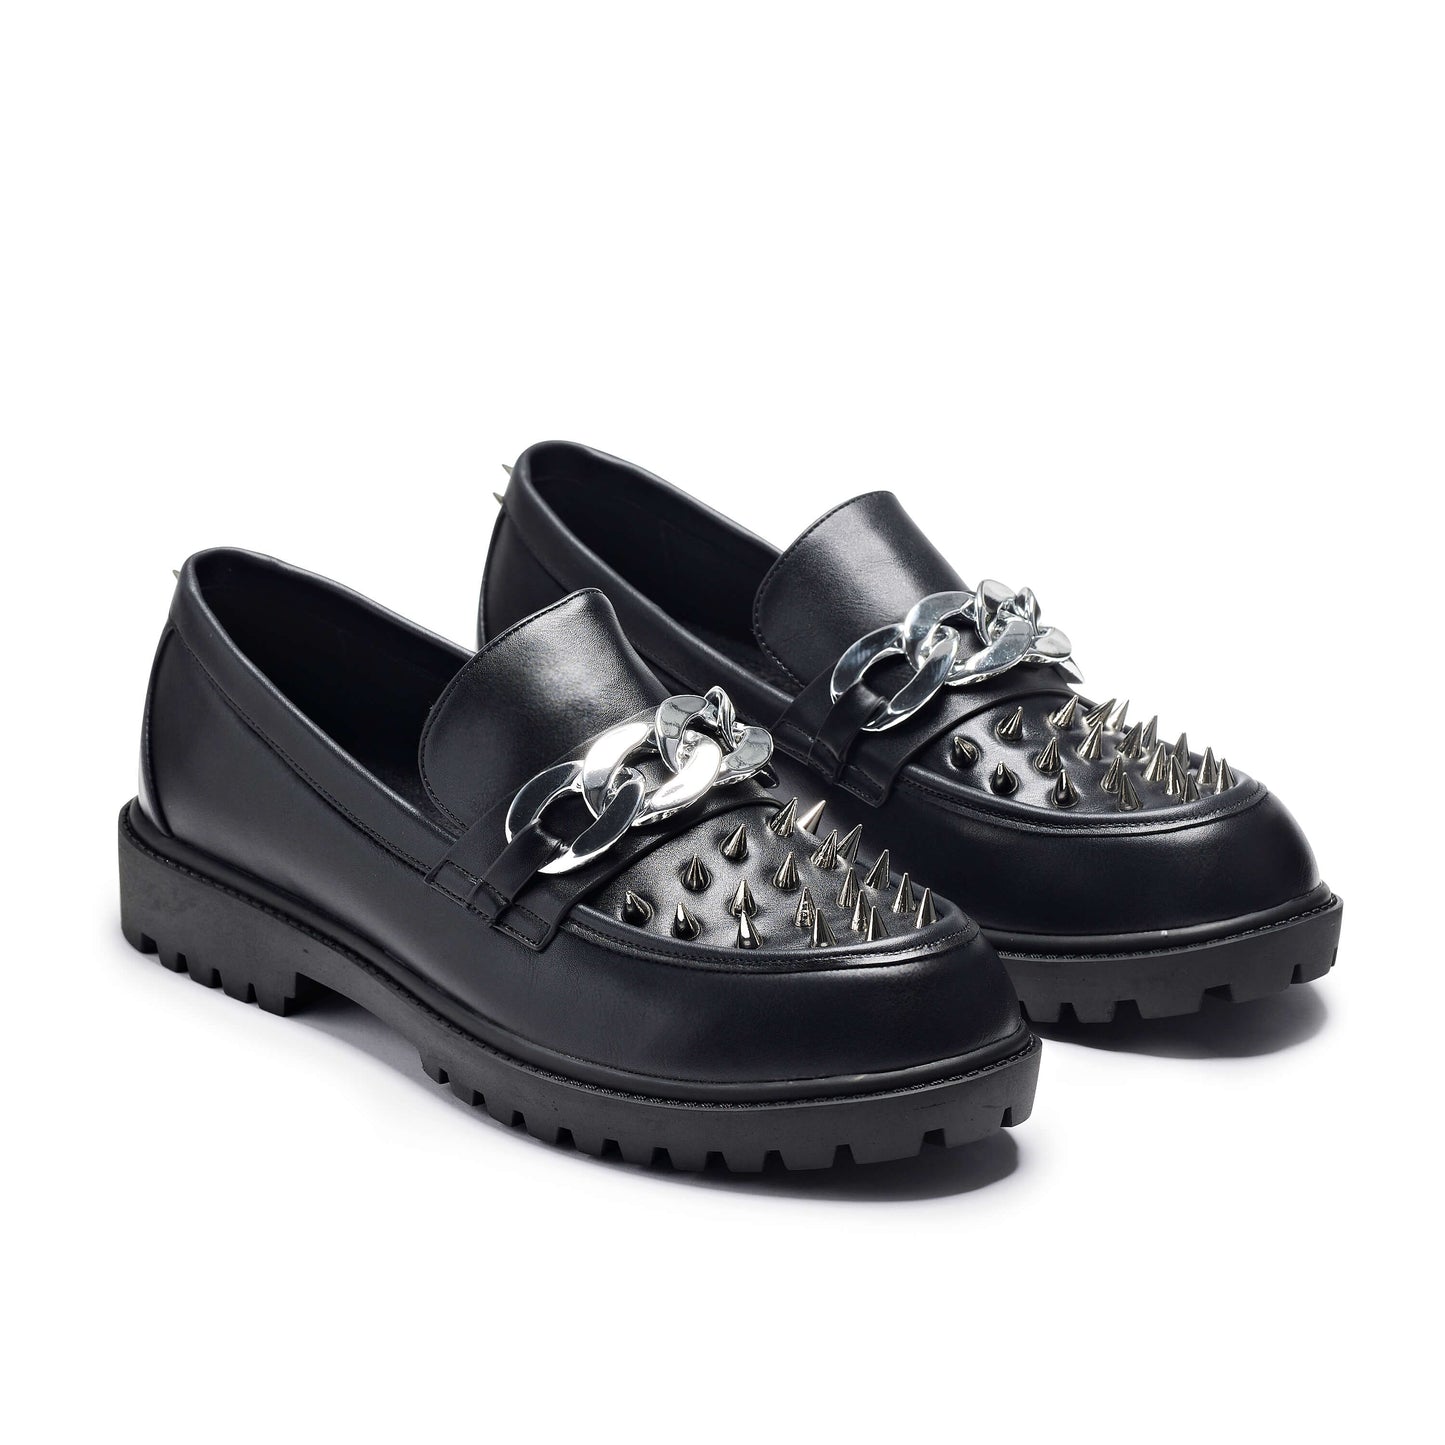 The Grave Warden Men's Spiked Loafers - Shoes - KOI Footwear - Black - Three-Quarter View